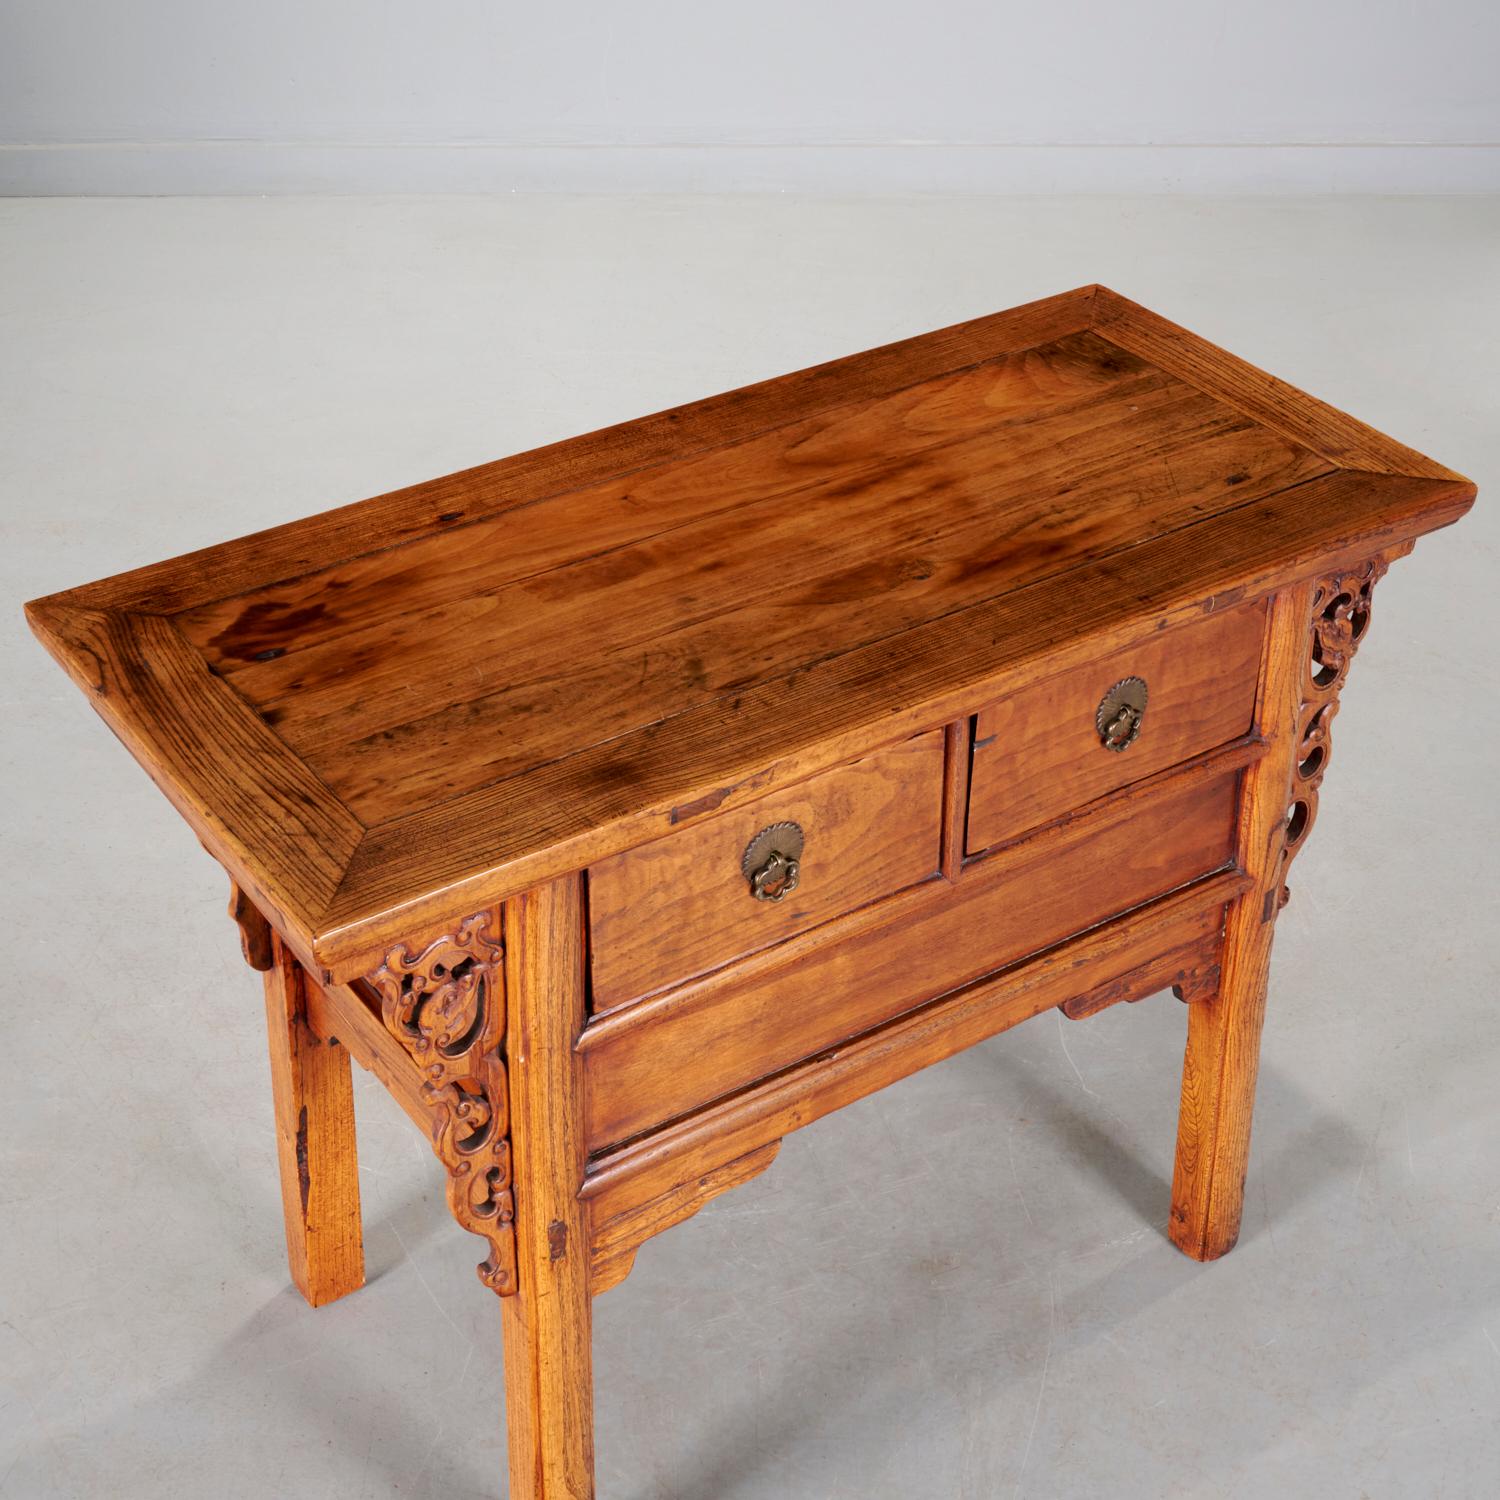 Qing Dynasty (19th c), an elm wood, two drawer, altar coffer with brass flower-shaped ring pulls. The rectangular top sits over two frieze drawers above a plank panel and shaped apron, flanked by pierced openwork scrolling cloud molding, the whole